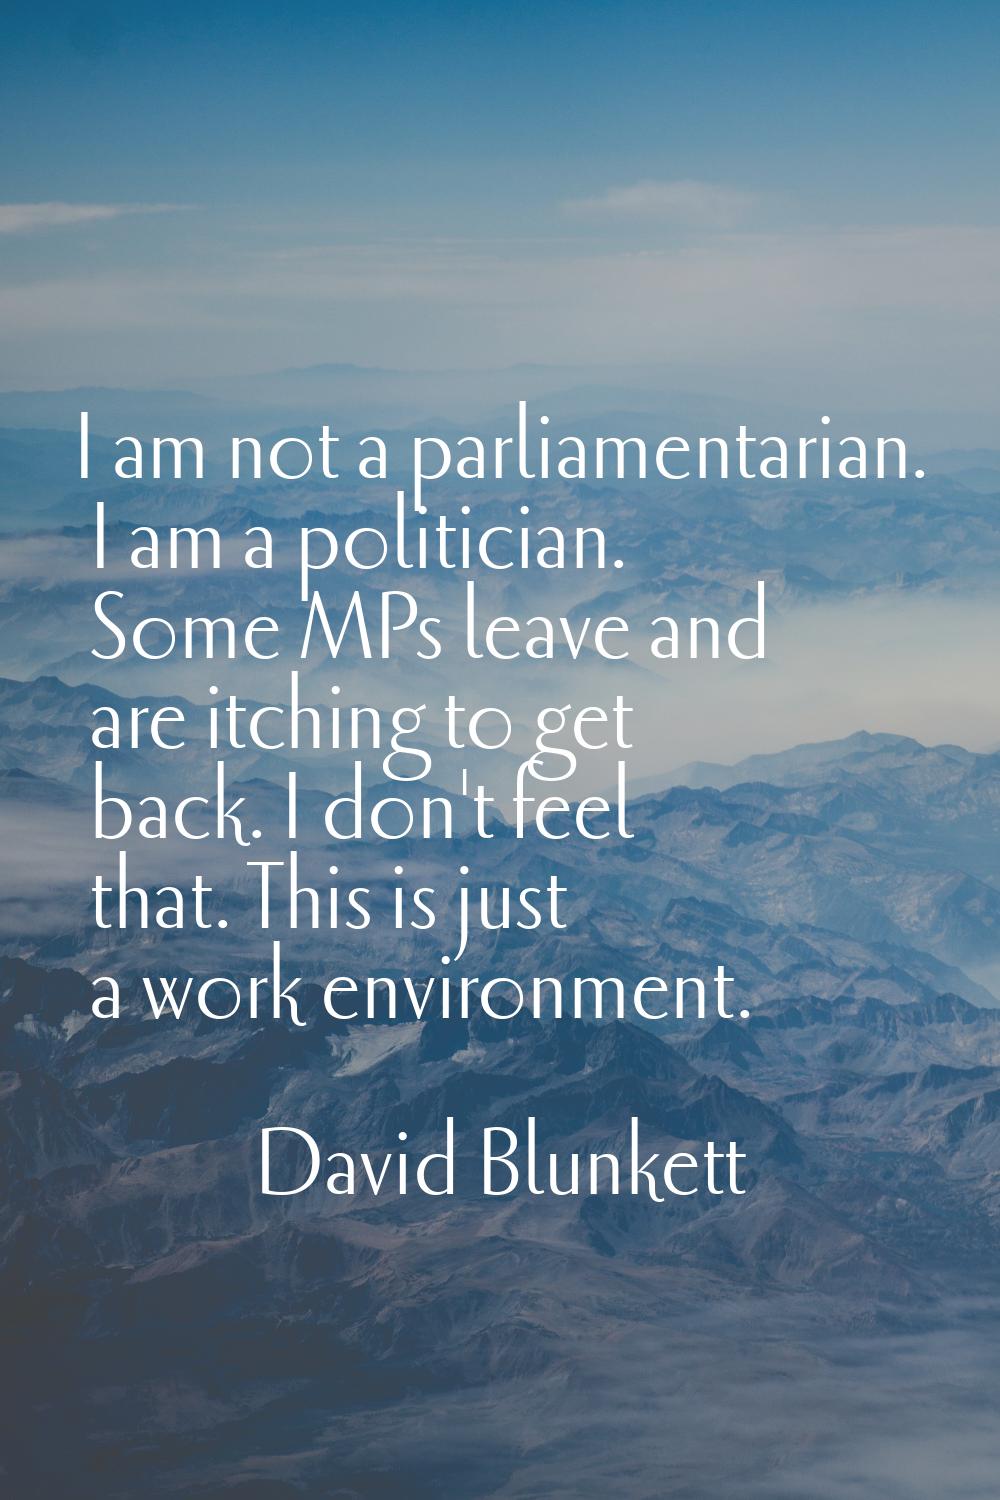 I am not a parliamentarian. I am a politician. Some MPs leave and are itching to get back. I don't 